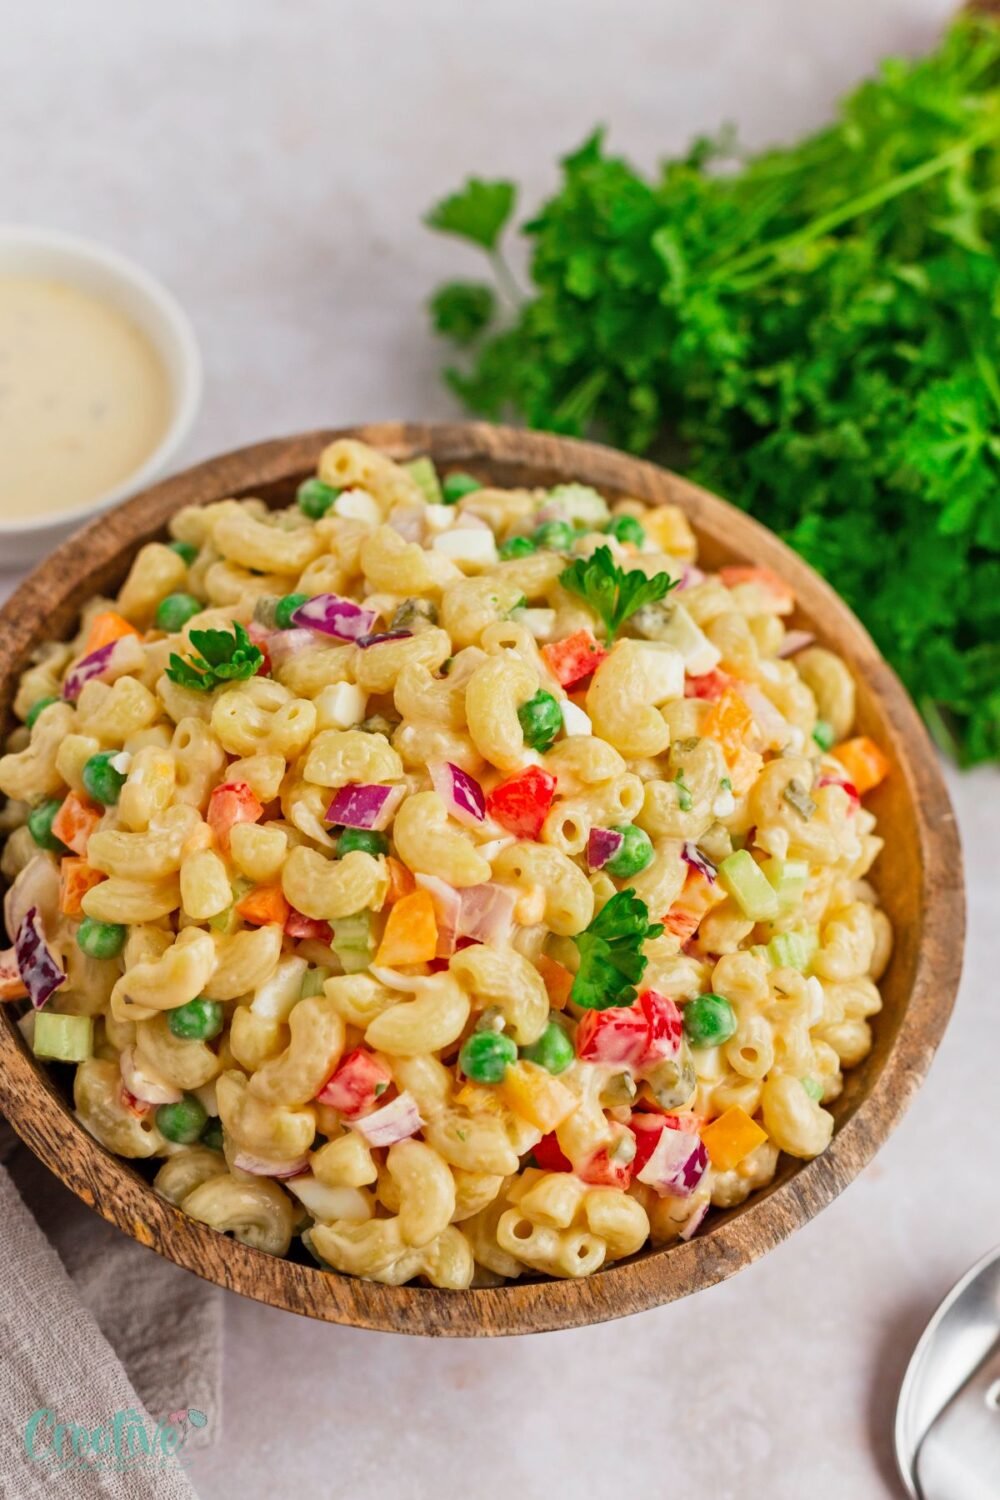 There's something about this Simple pasta salad recipe with mayo that just screams summertime.